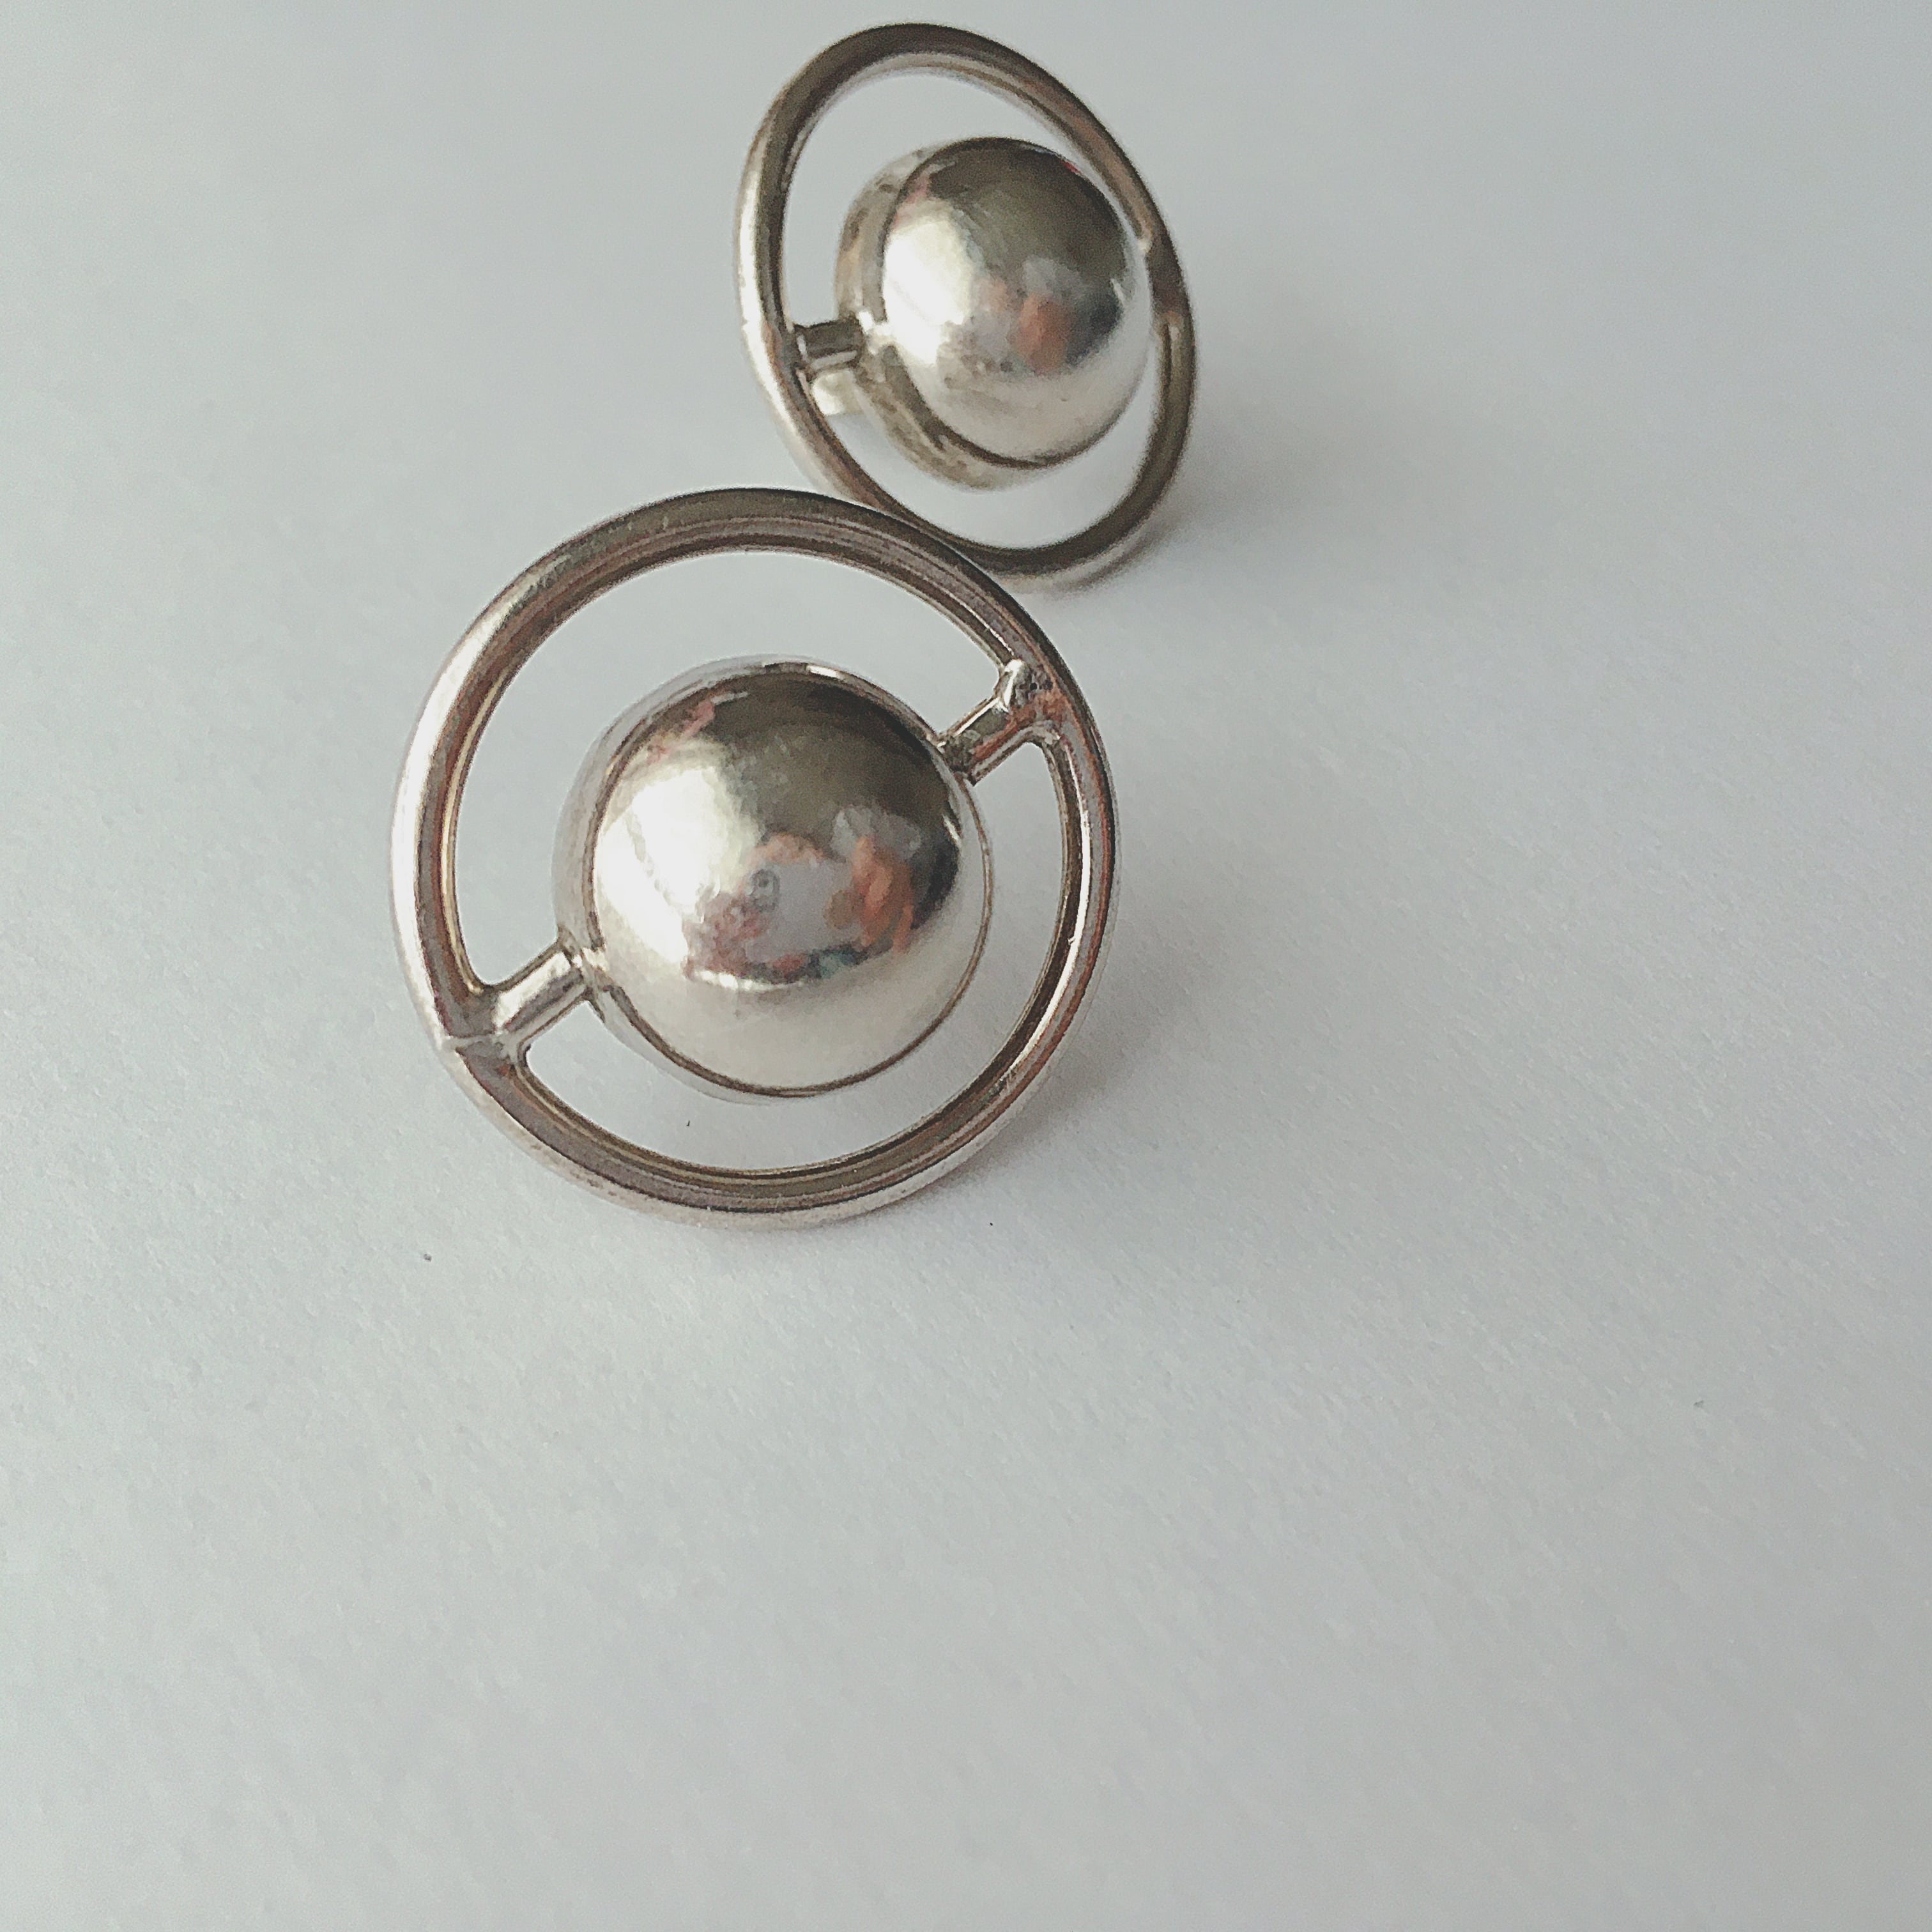 Vintage Mexico 925 sterling silver earrings ヴィンテージ メキシコ